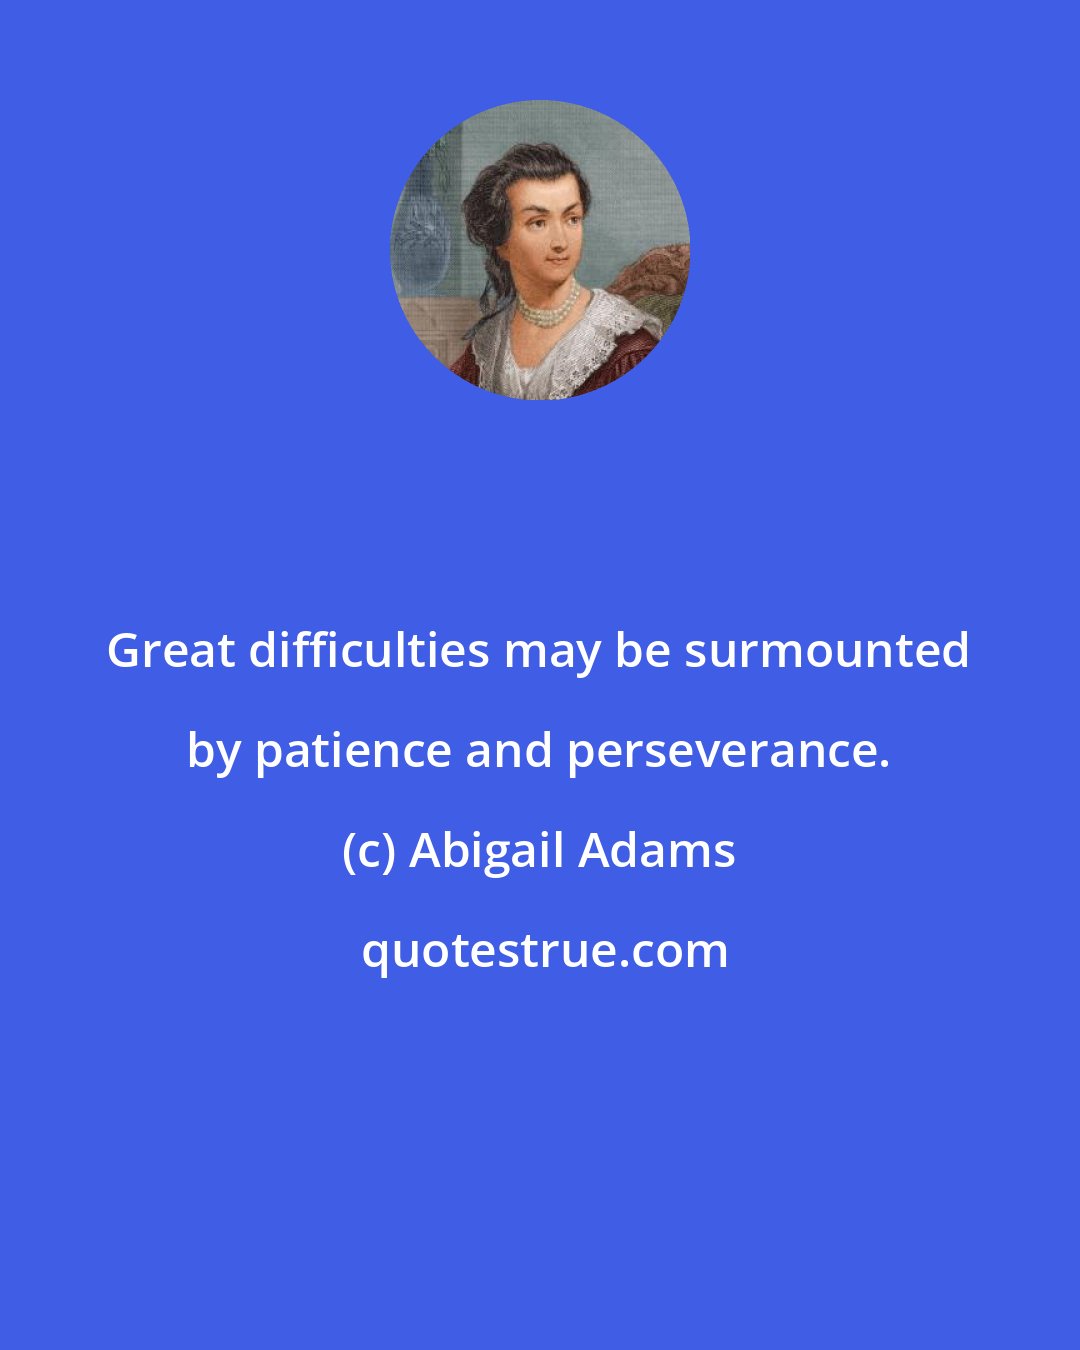 Abigail Adams: Great difficulties may be surmounted by patience and perseverance.